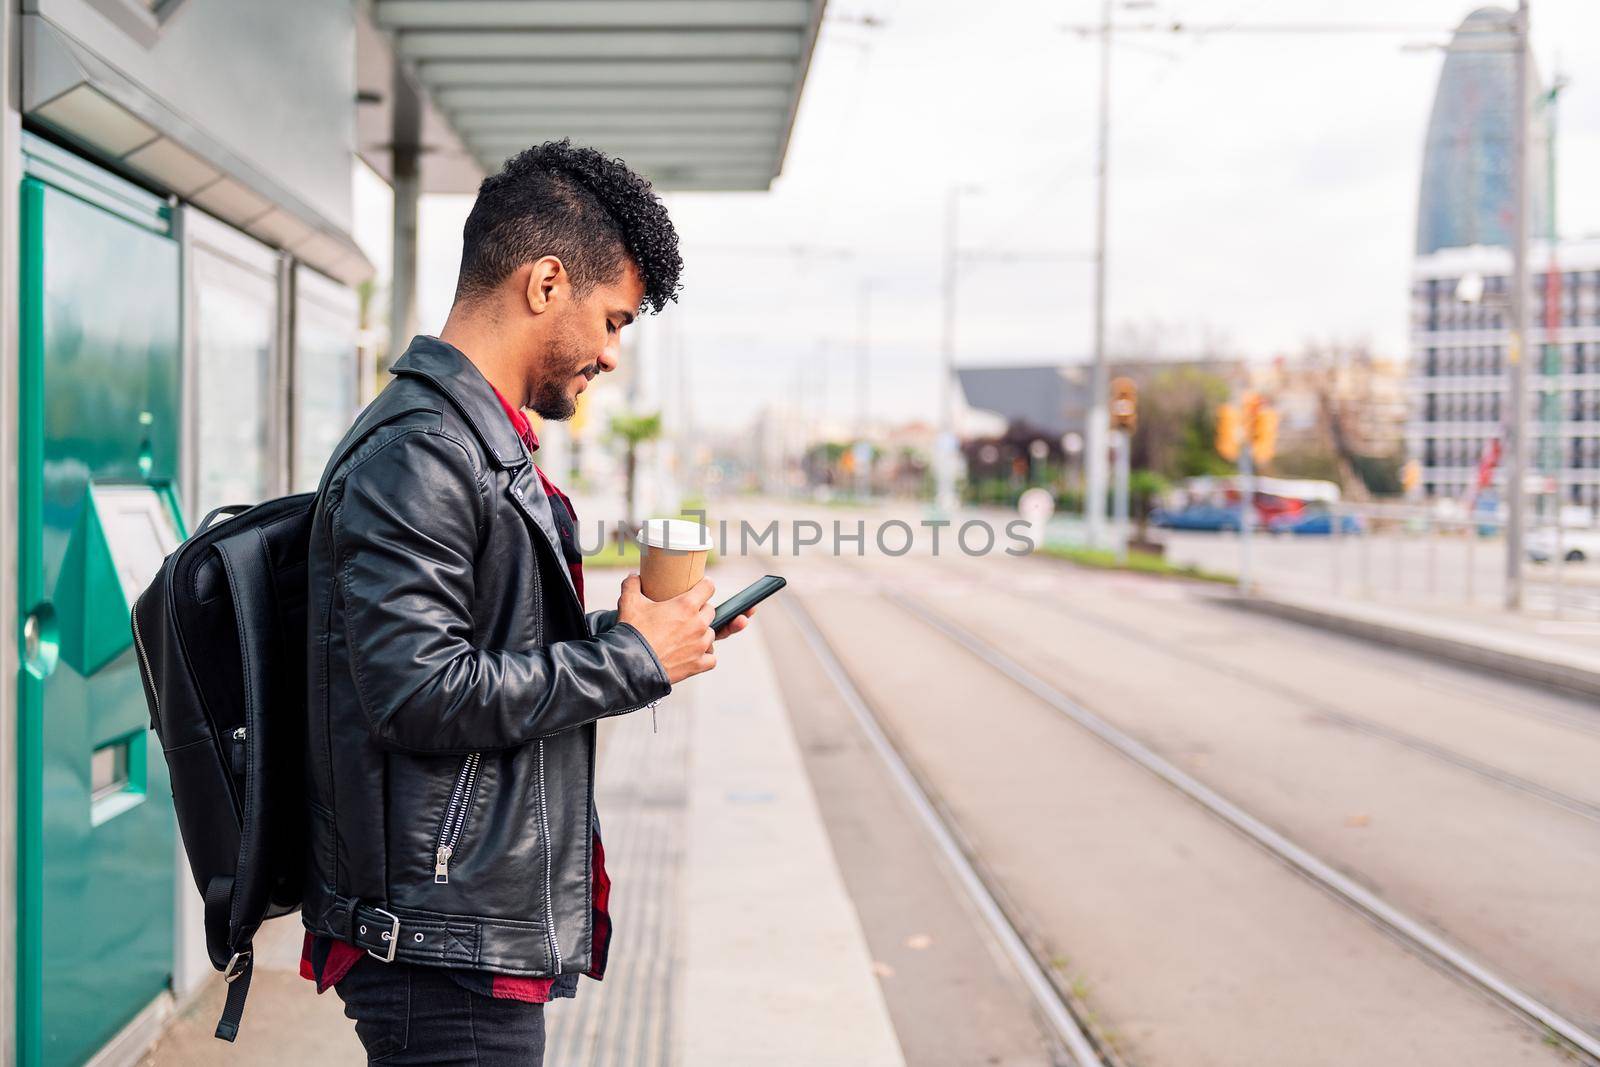 stylish latin student with coffee in hand consults his phone while waiting for public transportation to arrive at the streetcar stop, concept of sustainable transportation and urban lifestyle